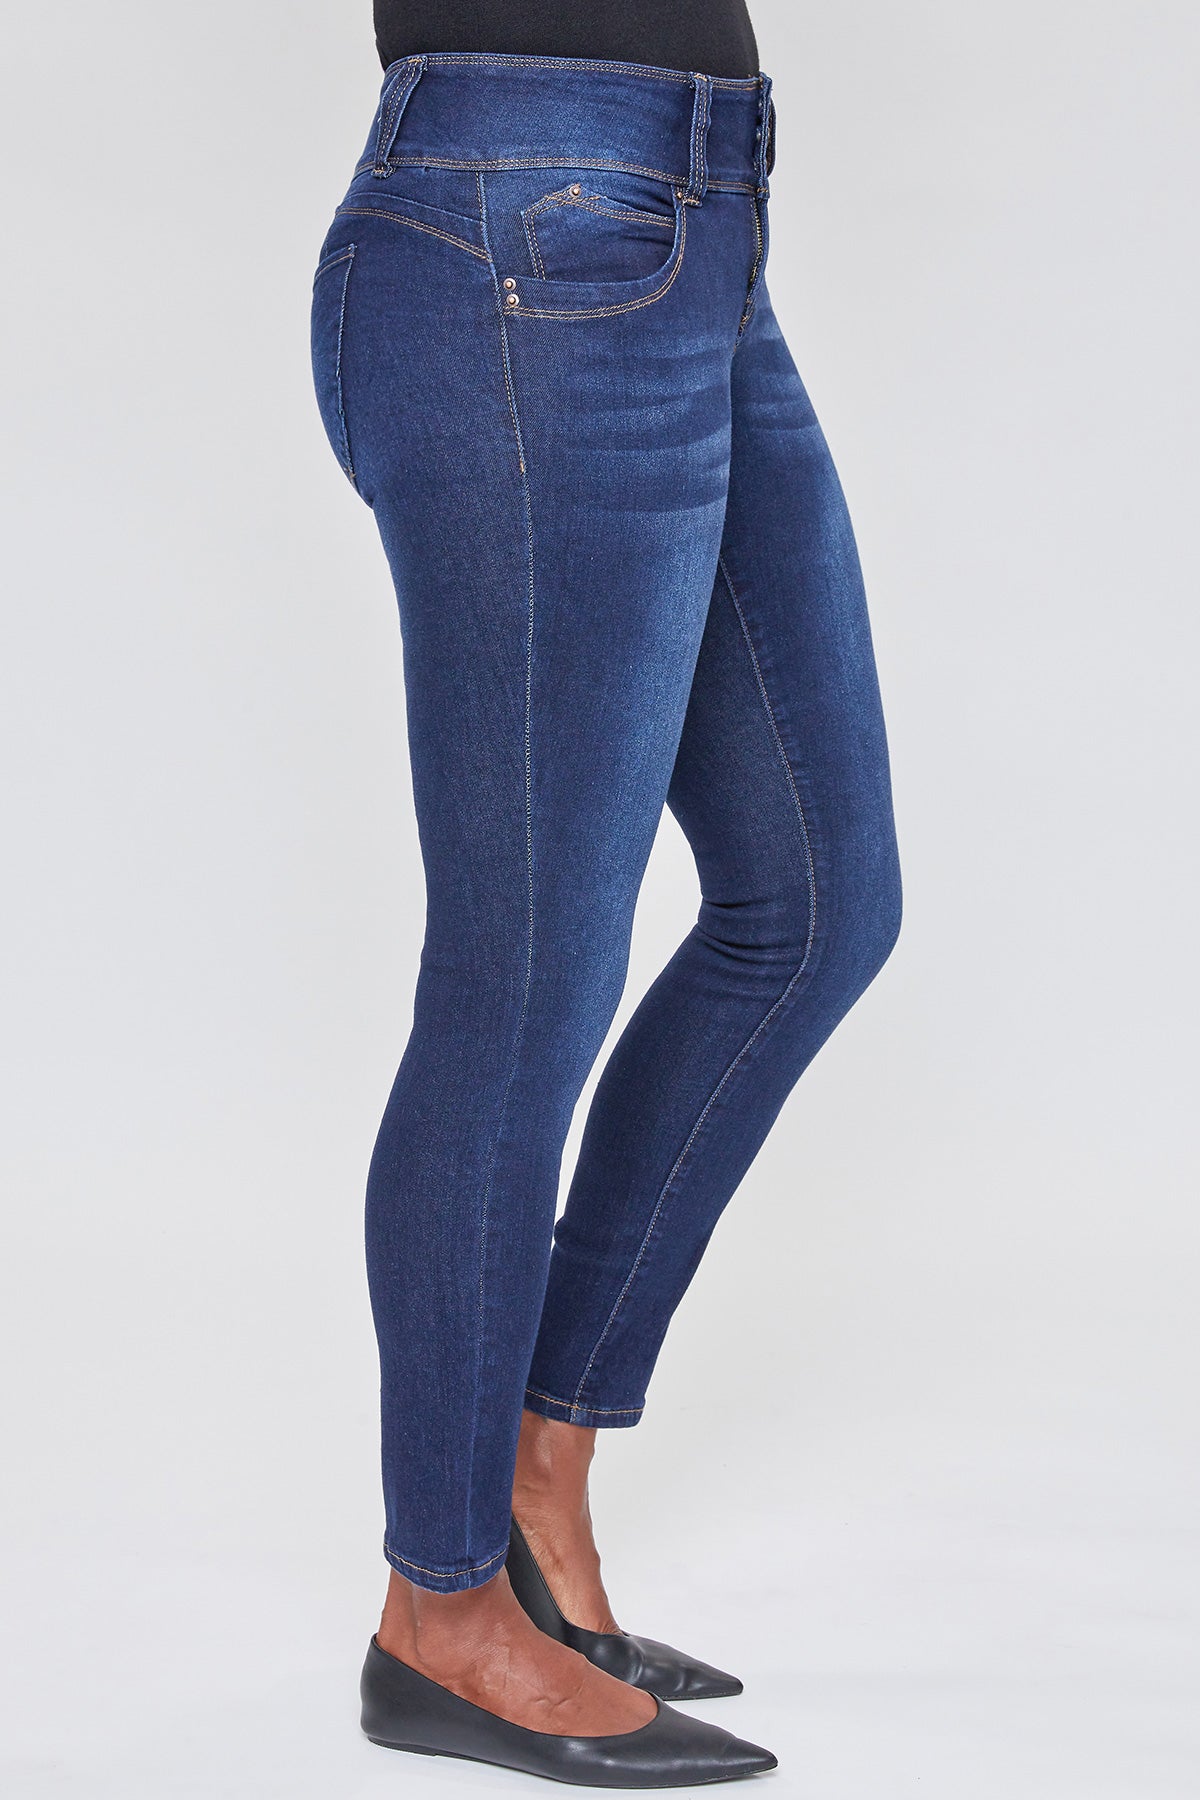 Missy Wannabettabutt 3-Button Mid-Rise Lycra Skinny Jean Made With Recycled Fibers Pack Of 12